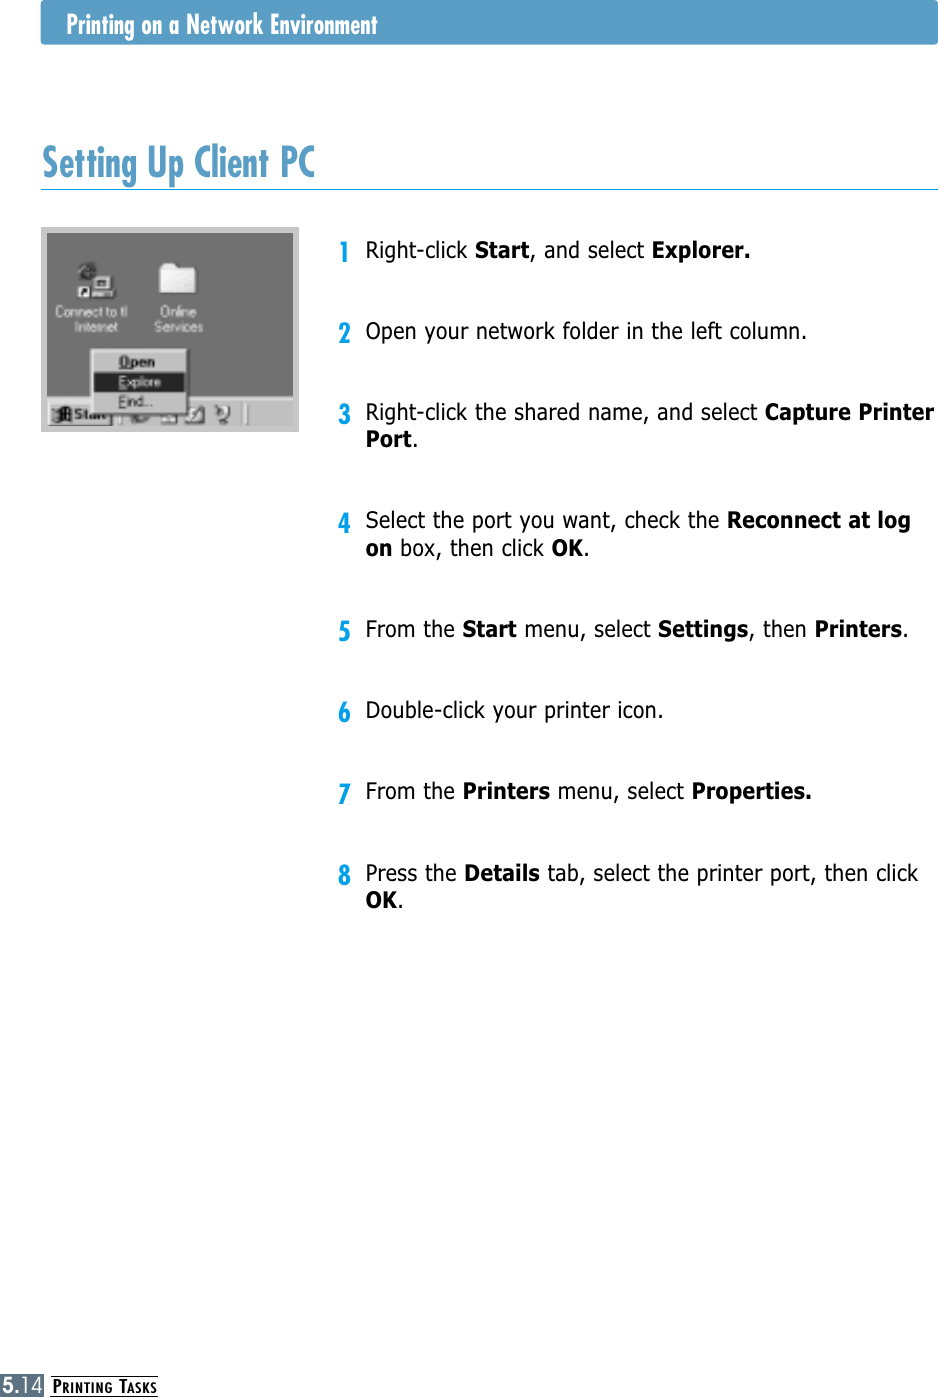 PRINTING TASKS5.141Right-click Start, and select Explorer.2Open your network folder in the left column.3Right-click the shared name, and select Capture PrinterPort.4Select the port you want, check the Reconnect at logon box, then click OK.5From the Start menu, select Settings, then Printers.6Double-click your printer icon.7From the Printers menu, select Properties.8Press the Details tab, select the printer port, then clickOK.Setting Up Client PCPrinting on a Network Environment